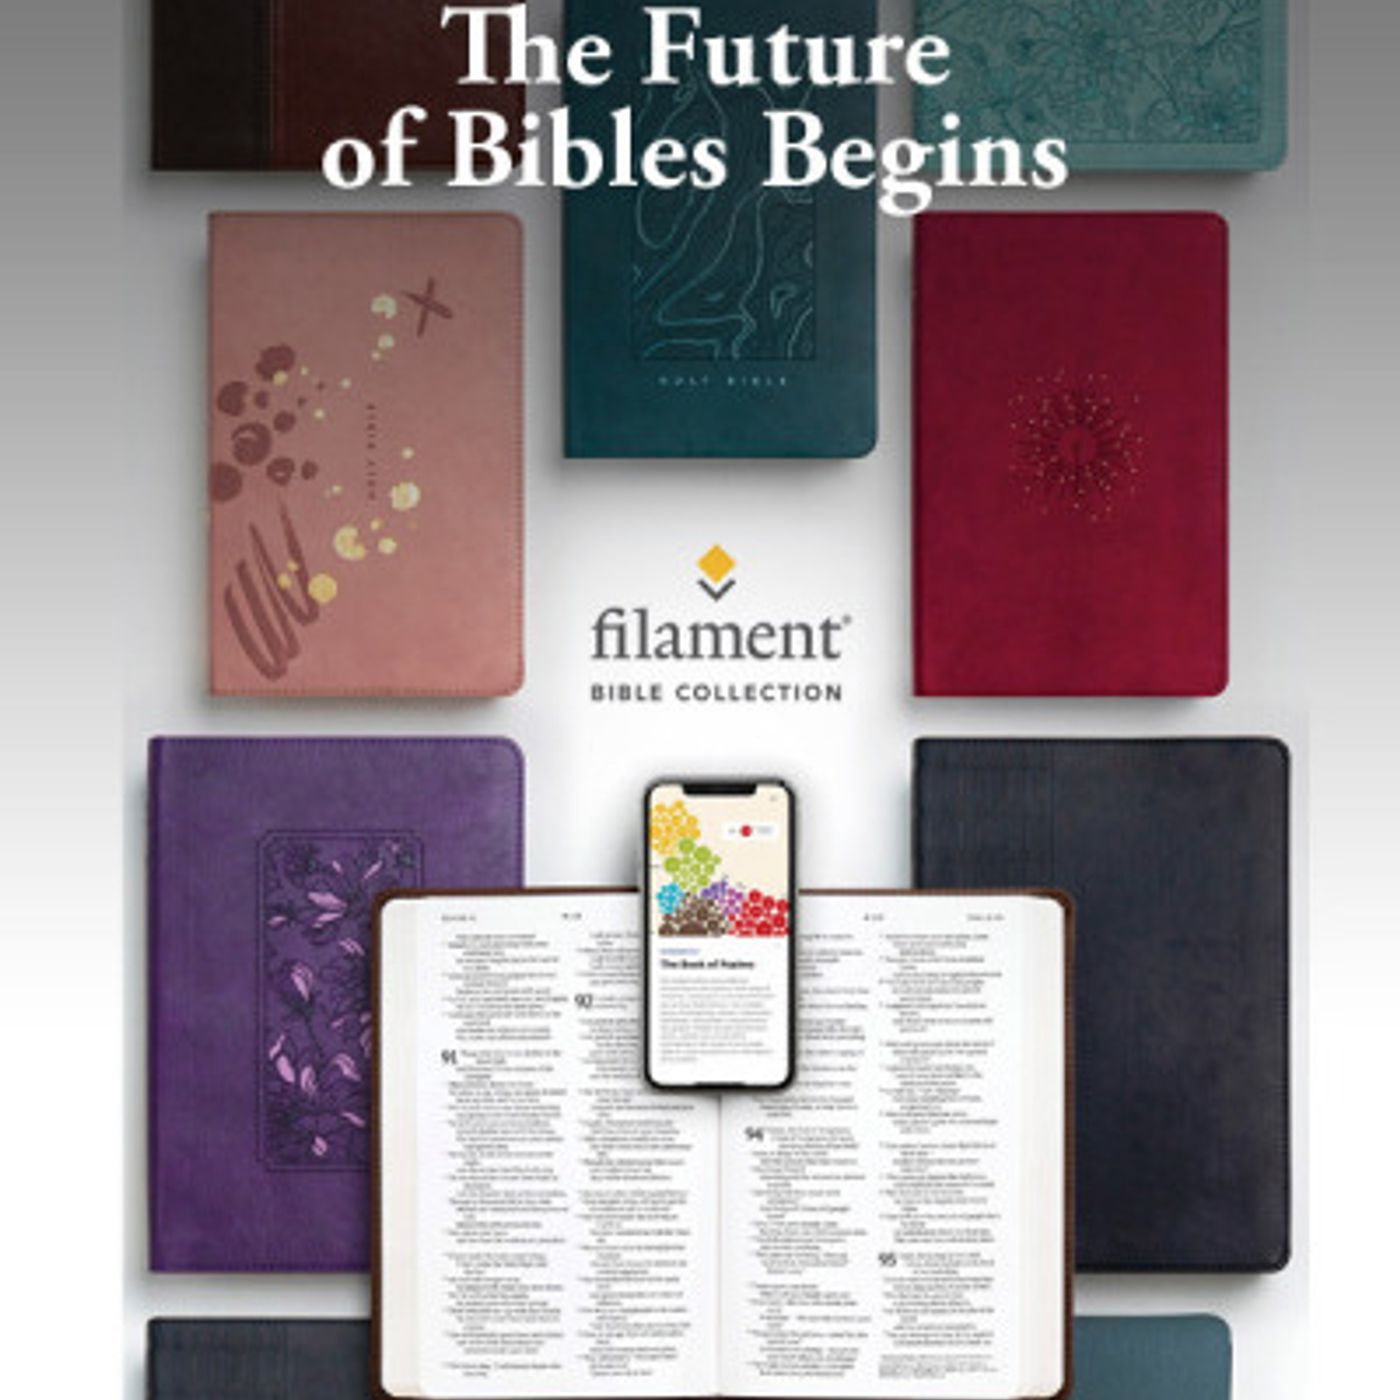 The Future of Bibles